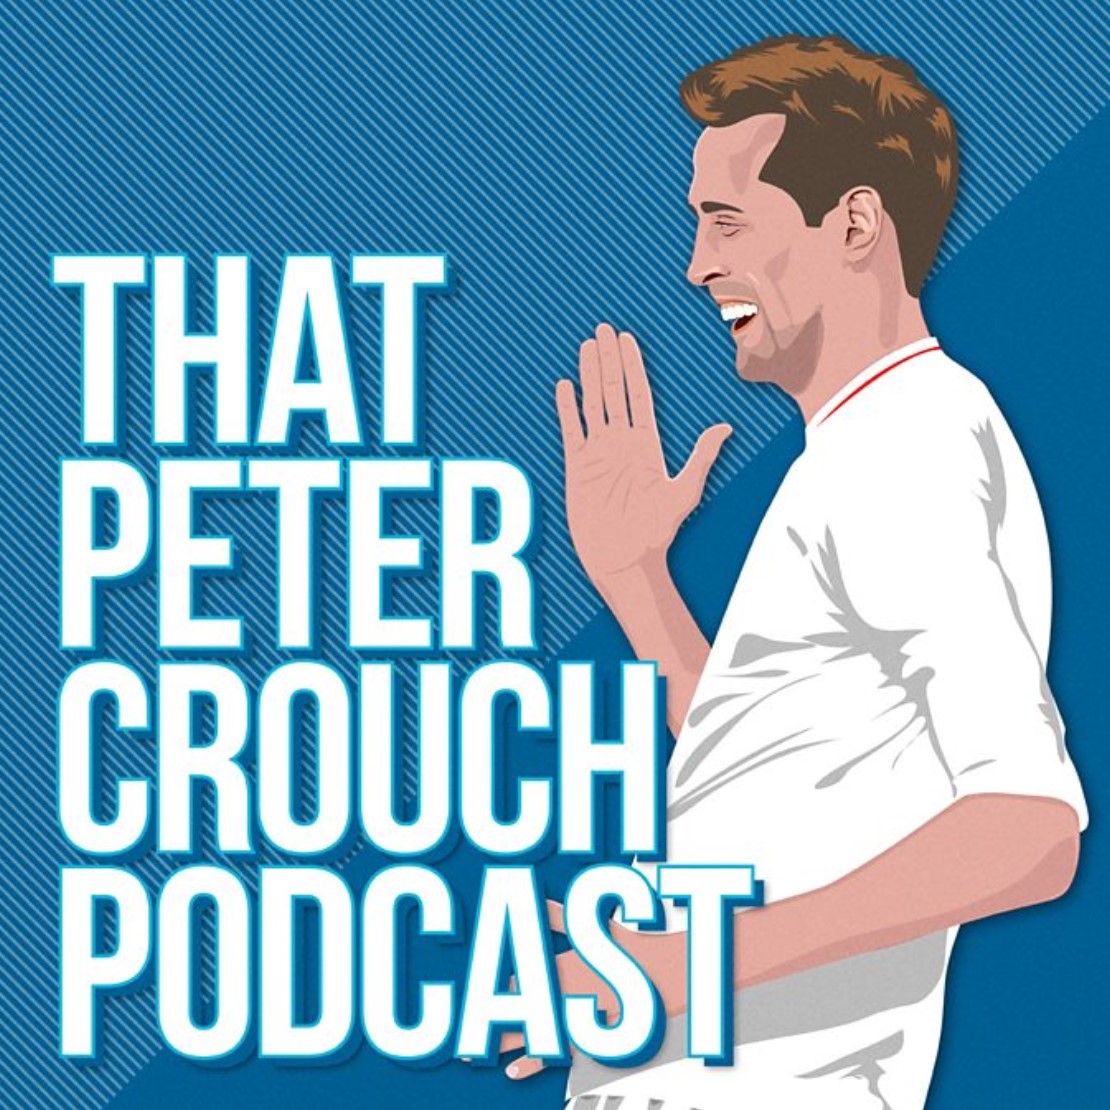 That peter crouch podcast